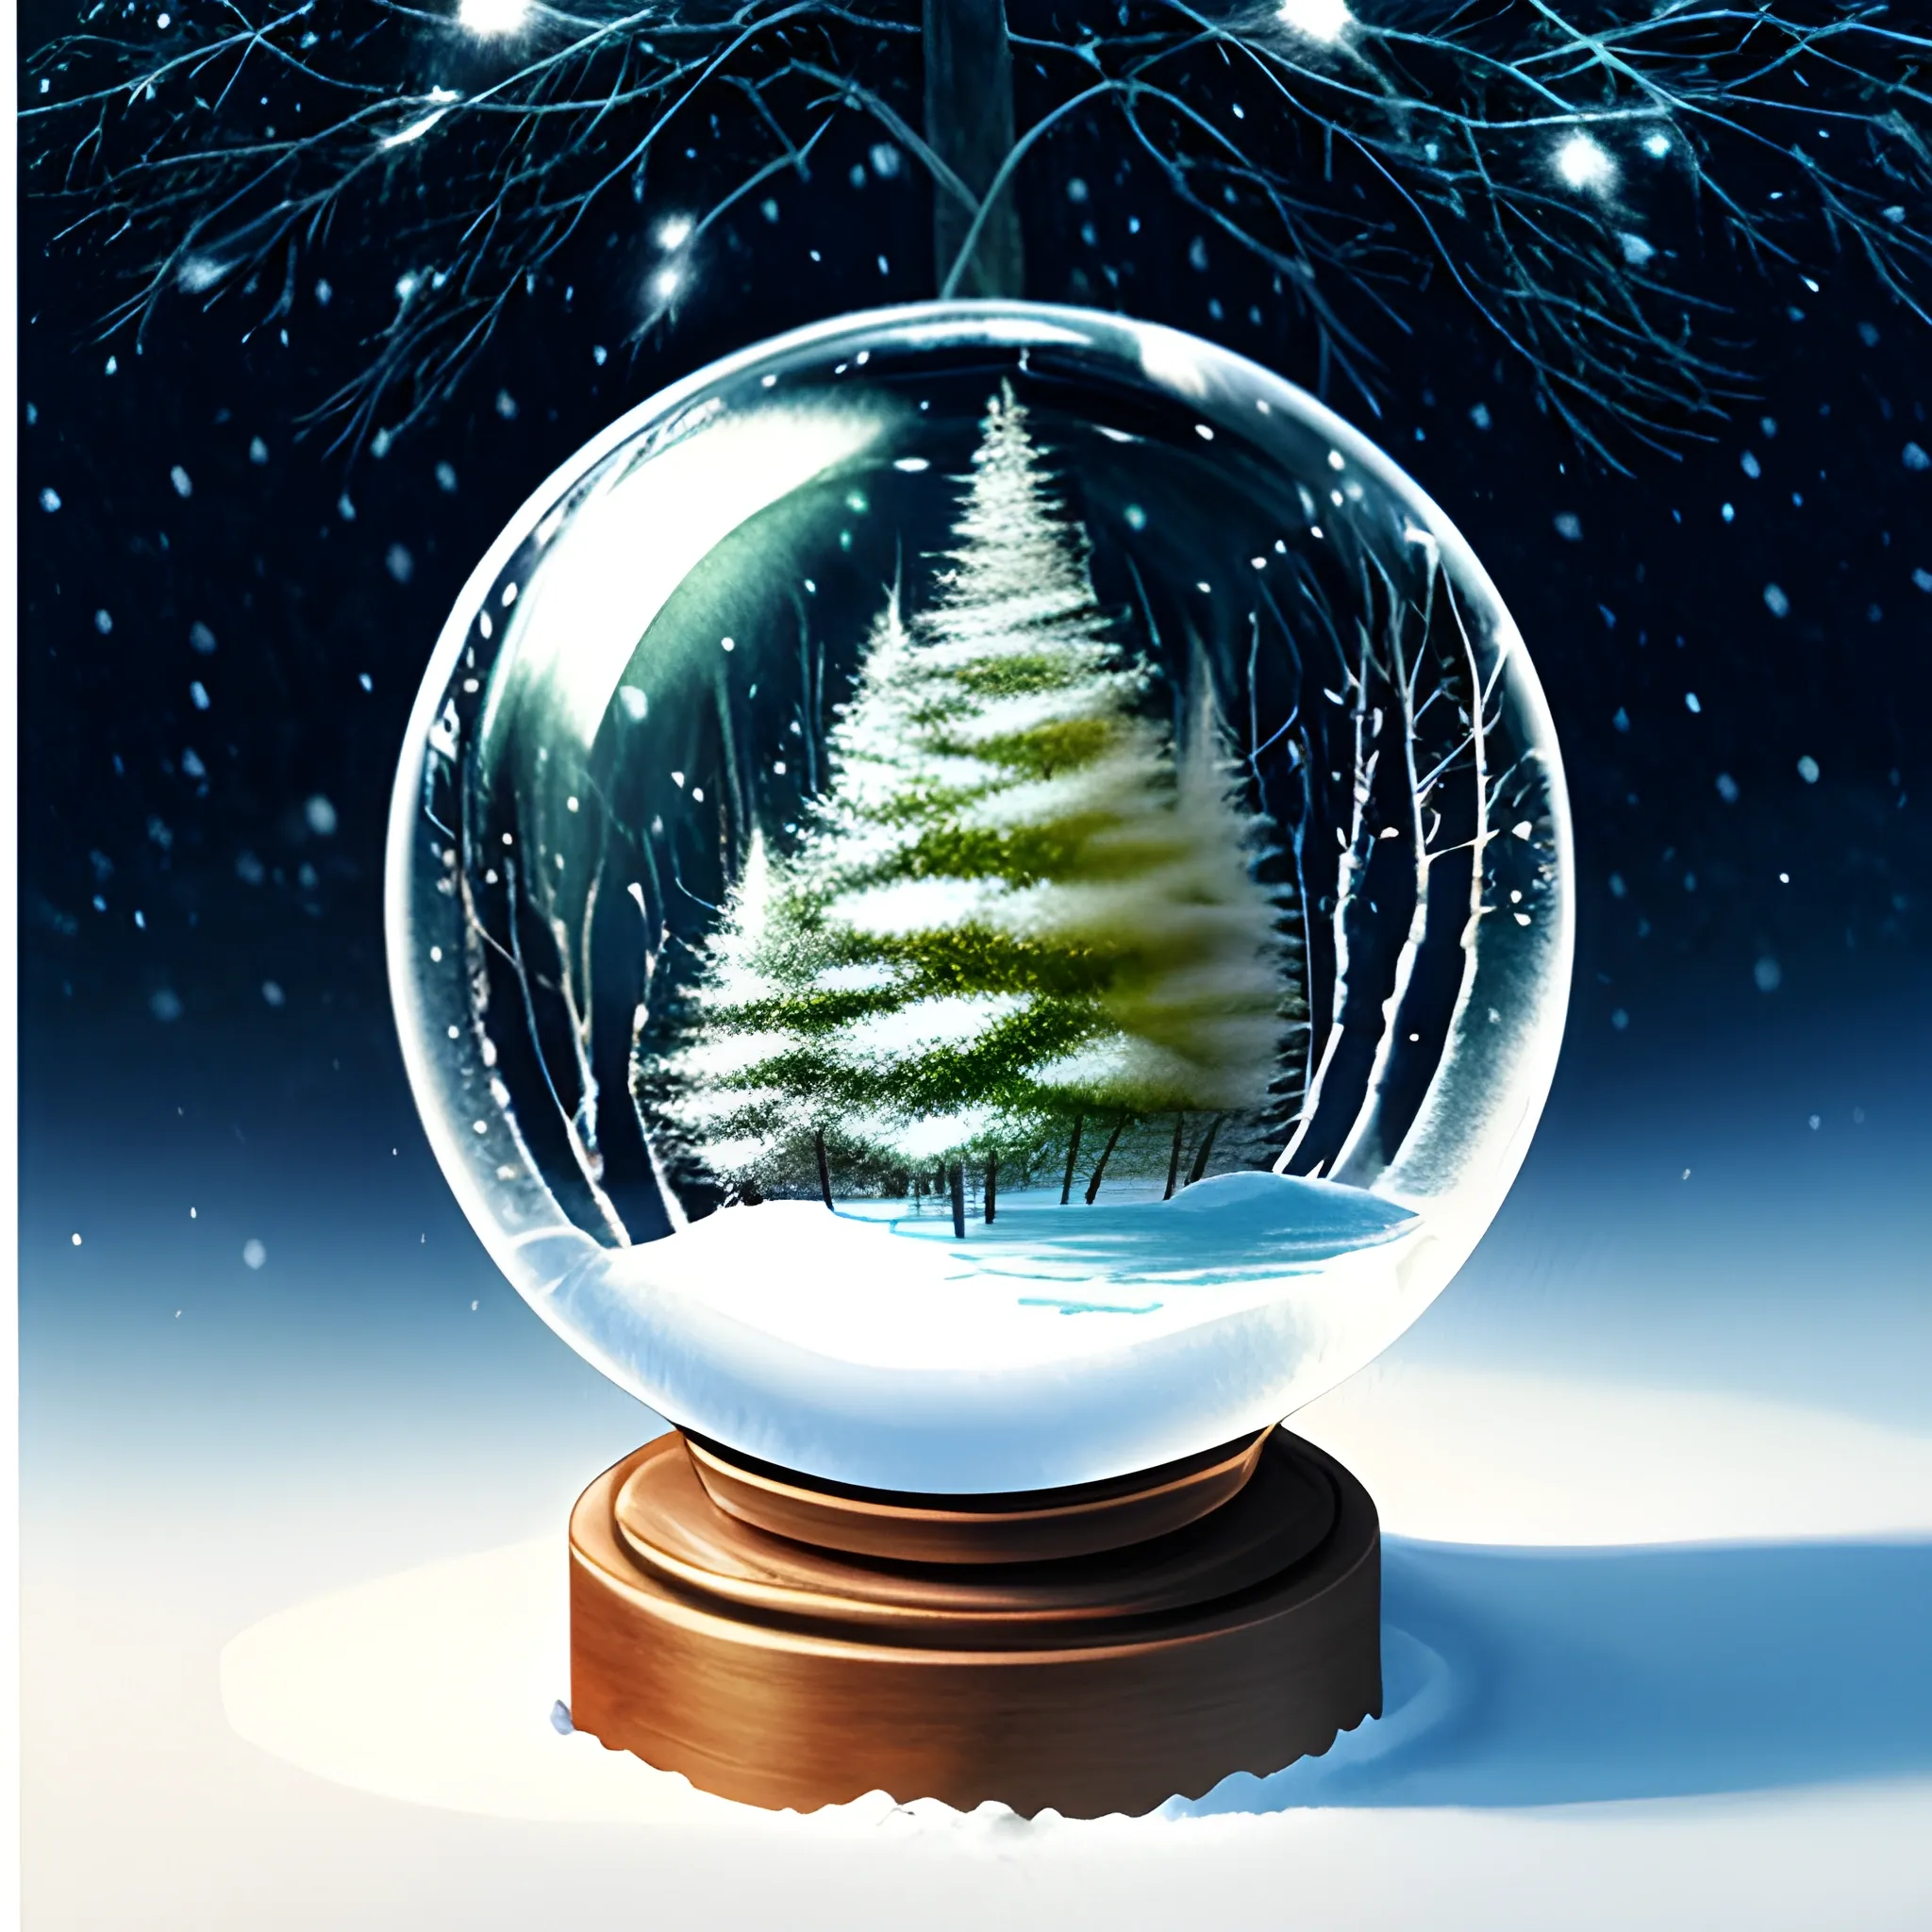 a snowy landscape, in the foreground a tree with fireflies like Christmas lights, all inside a glass sphere,, Water Color